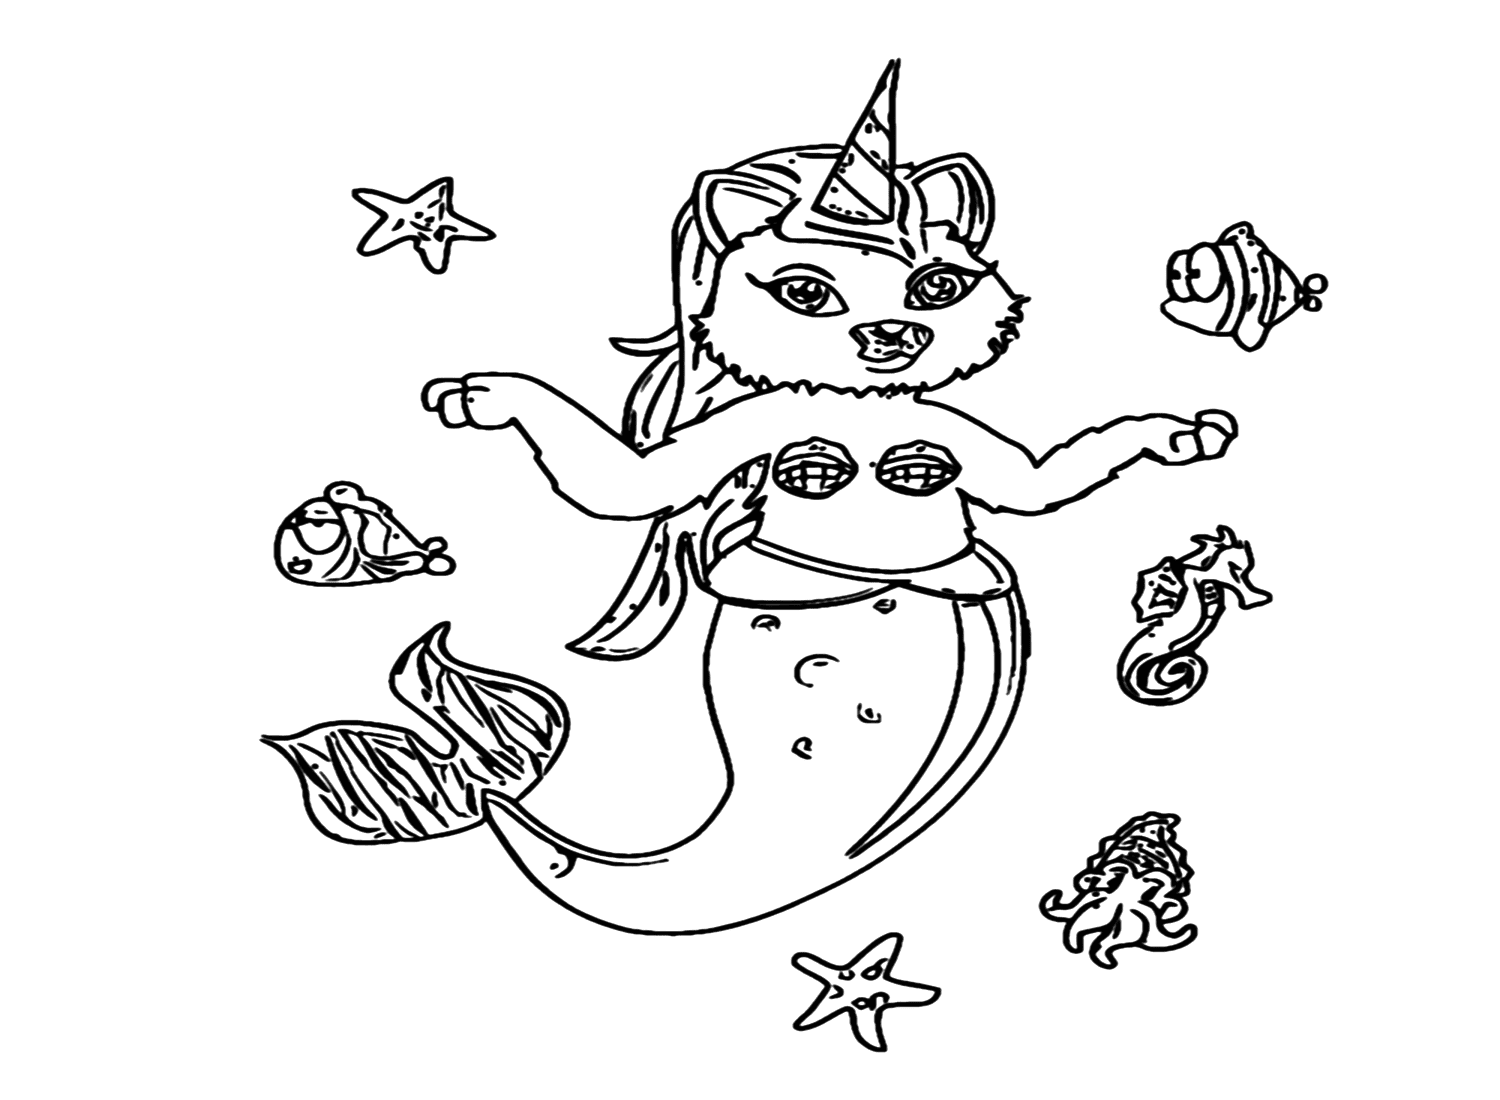 Unicorn Kitty Mermaid Coloring Page from Unicorn Cat